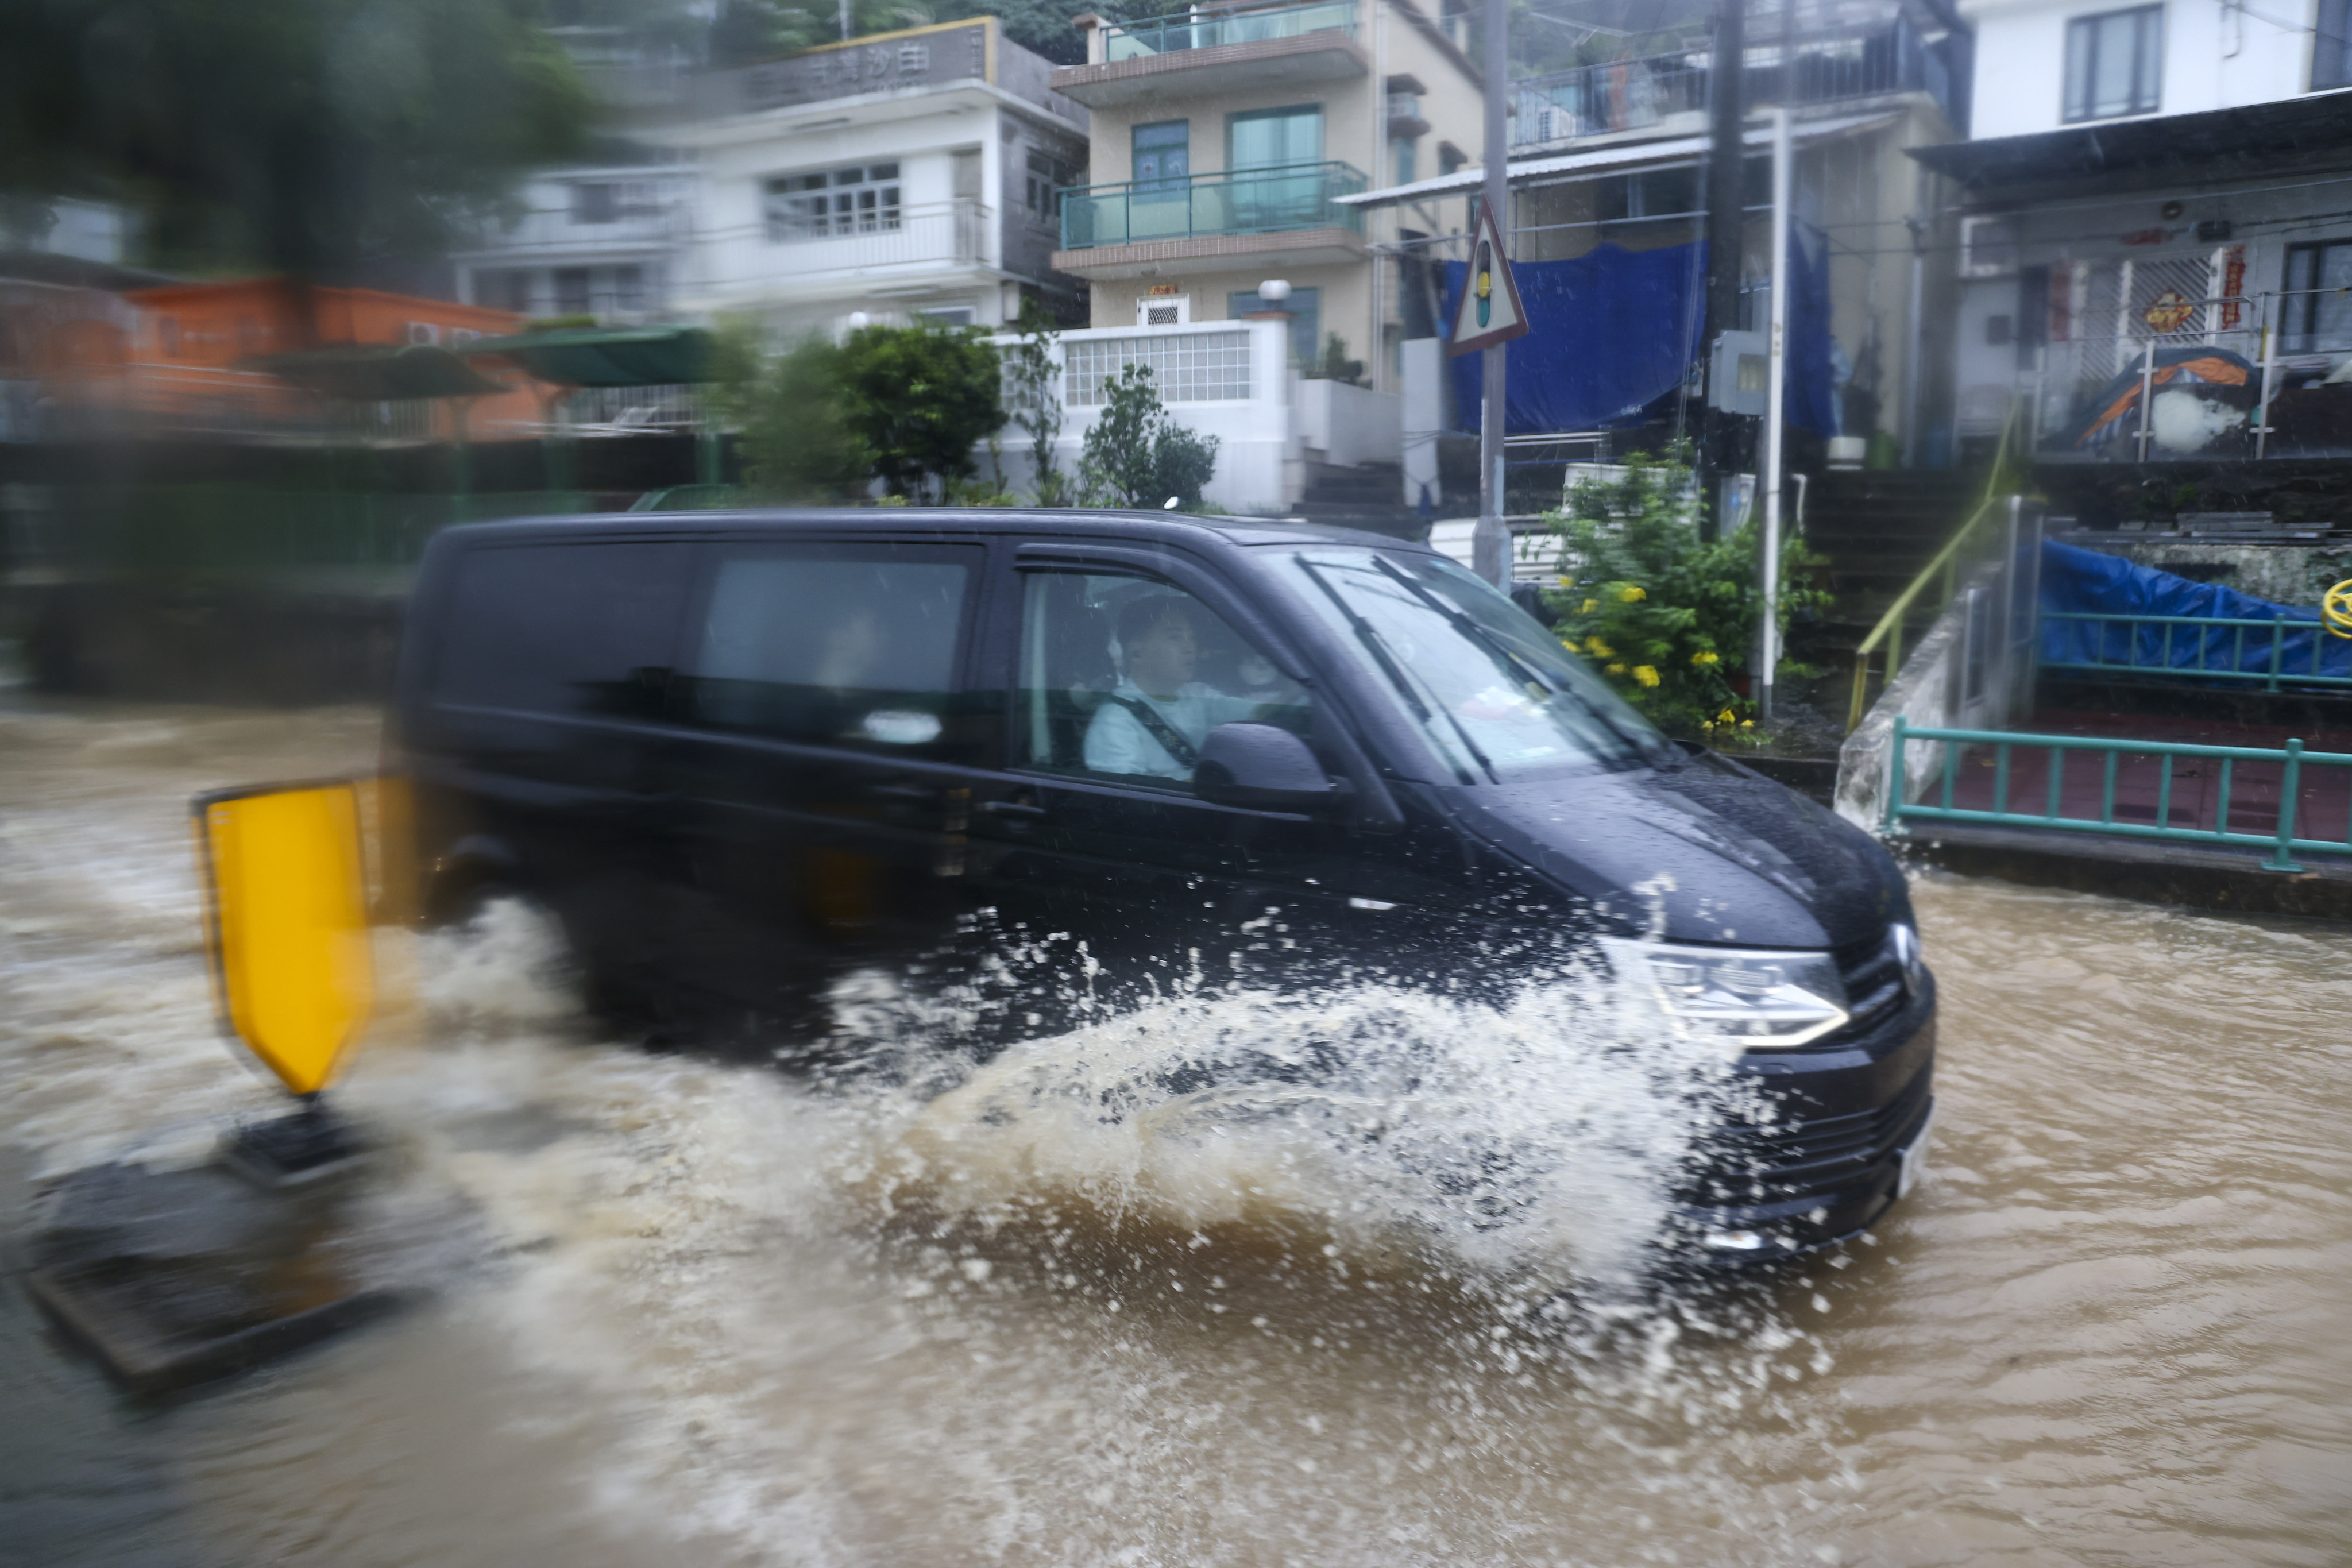 A vehicle sloshes through floodwaters in Sai Kung on May 4. Serious flooding and damage from unusually strong storms underscore Hong Kong’s inadequacies in coping with extreme weather. Photo: Dickson Lee